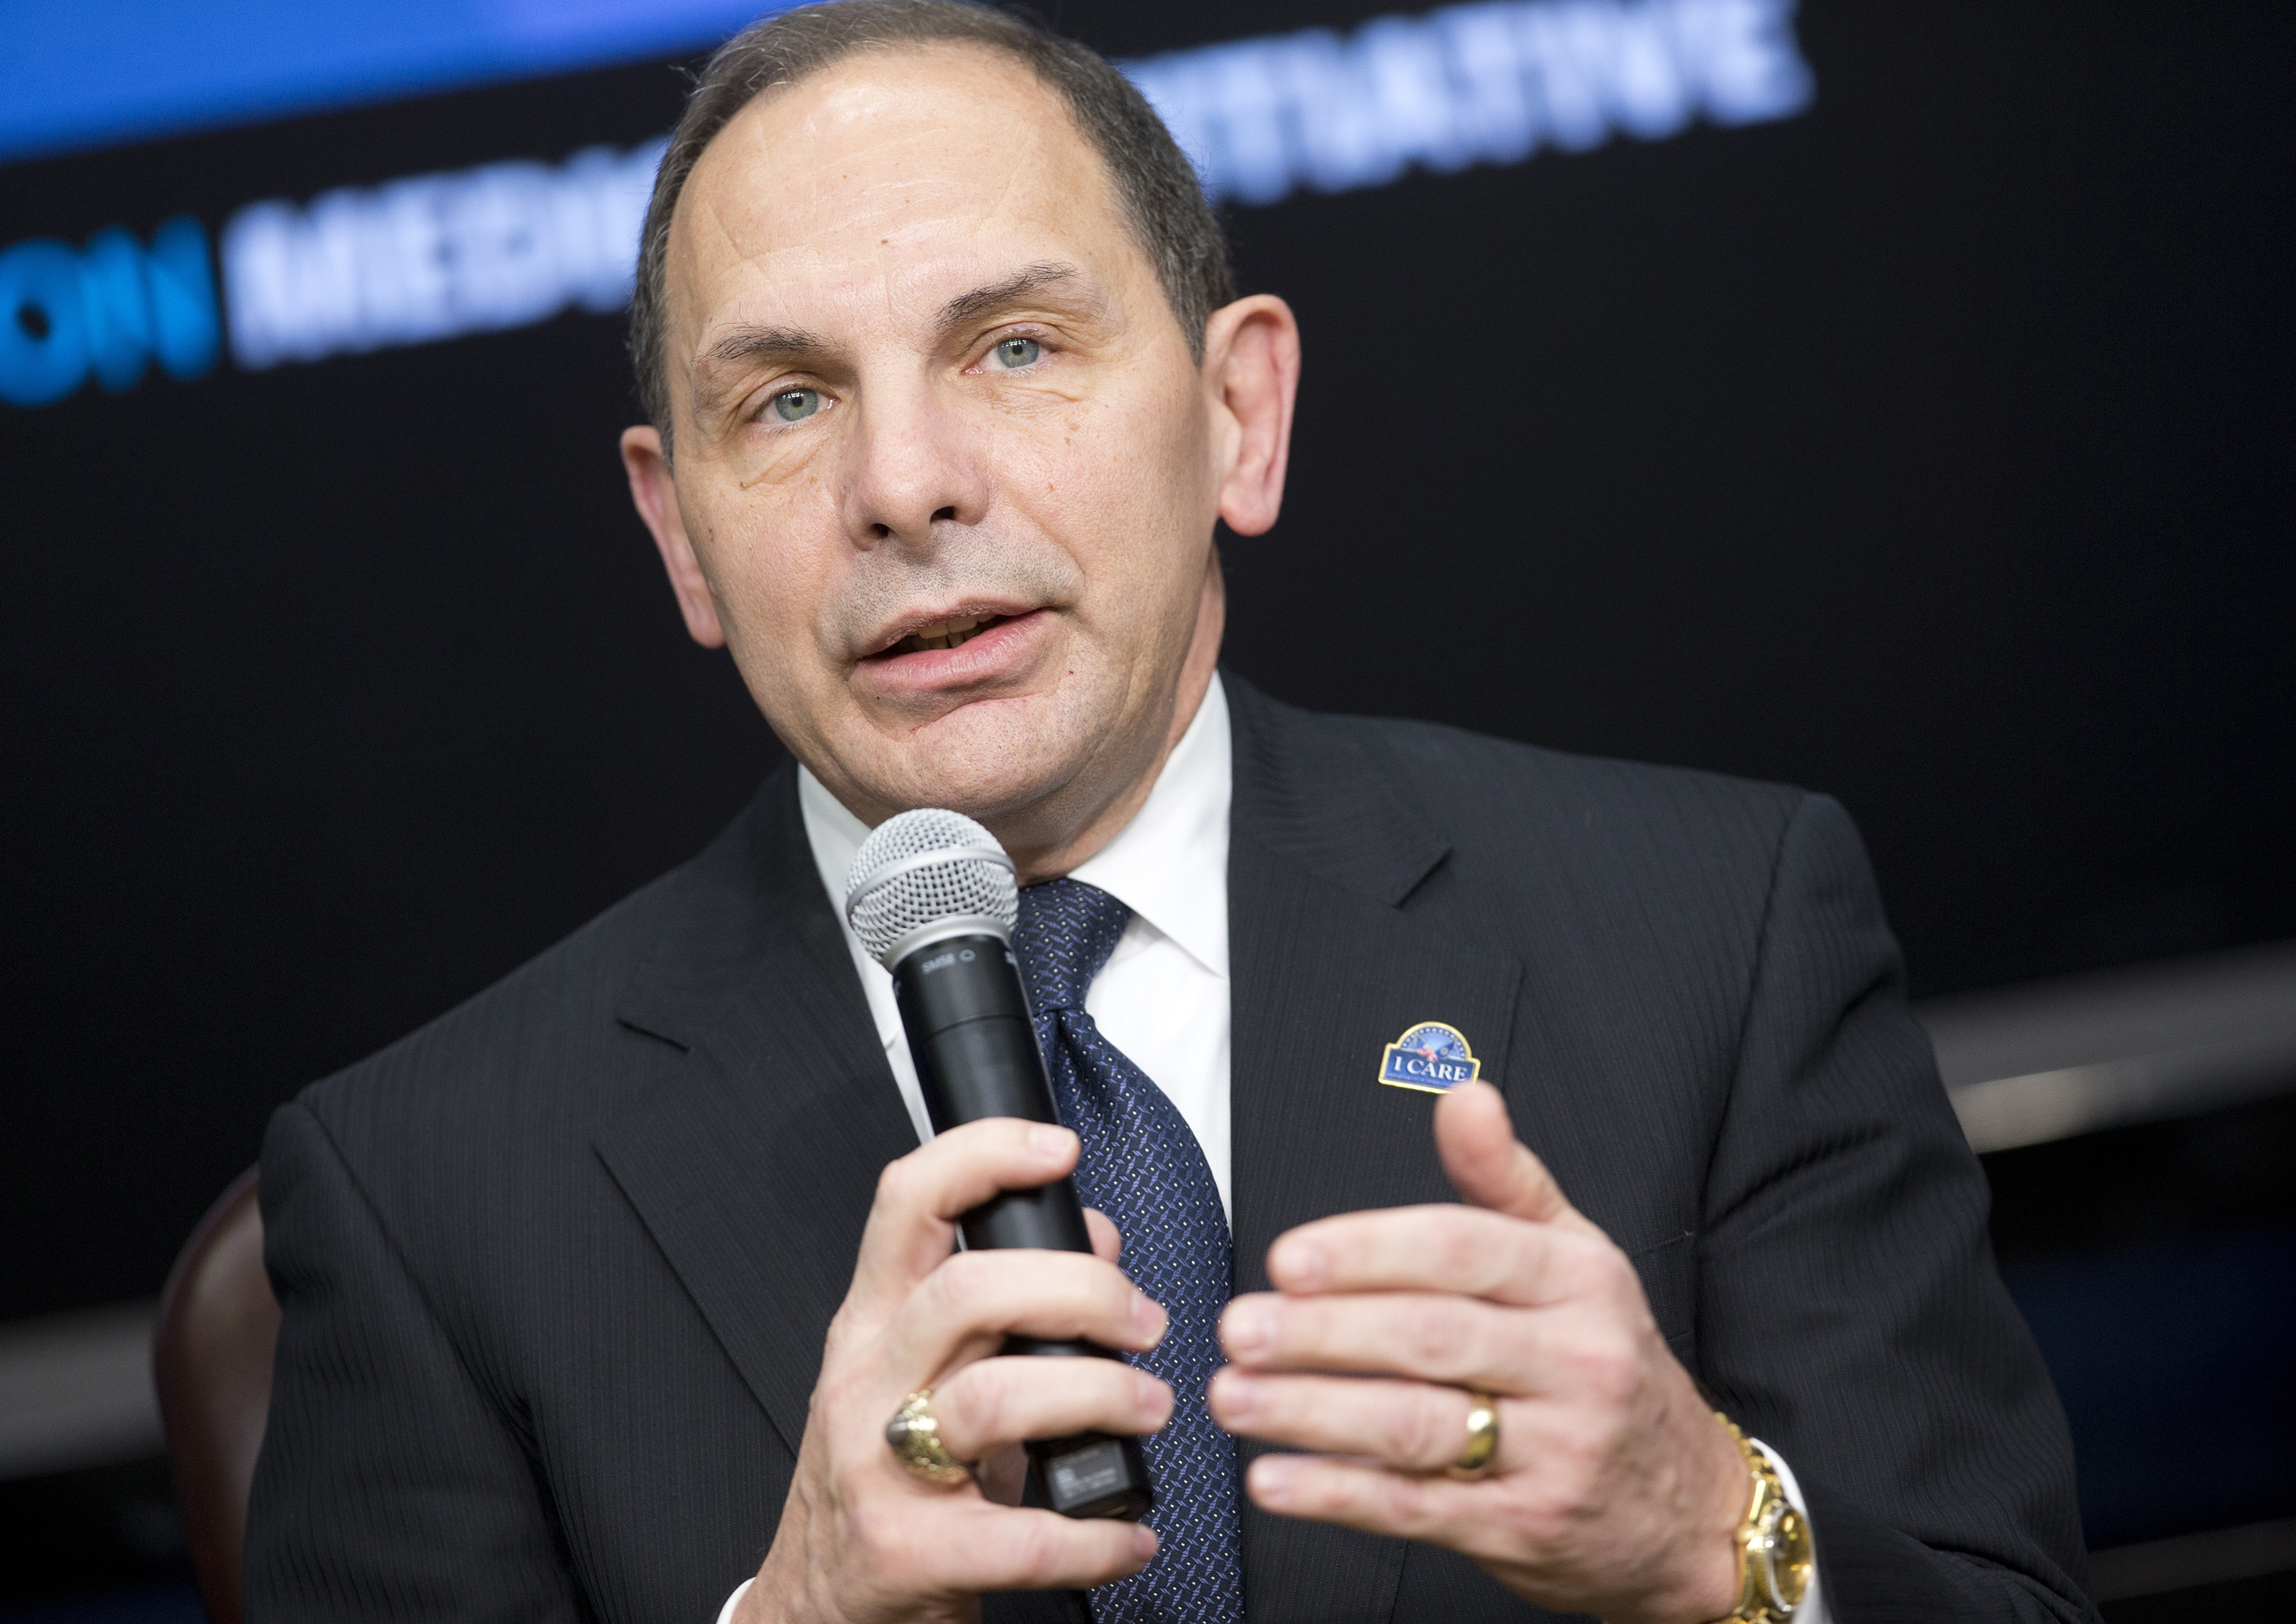 Veterans Affairs Secretary Robert McDonald during a panel discussion as part of the White House Precision Medicine Initiative (PMI)  at the White House in Washingto on Feb. 25, 2016 (Pablo Martinez Monsivais—AP)